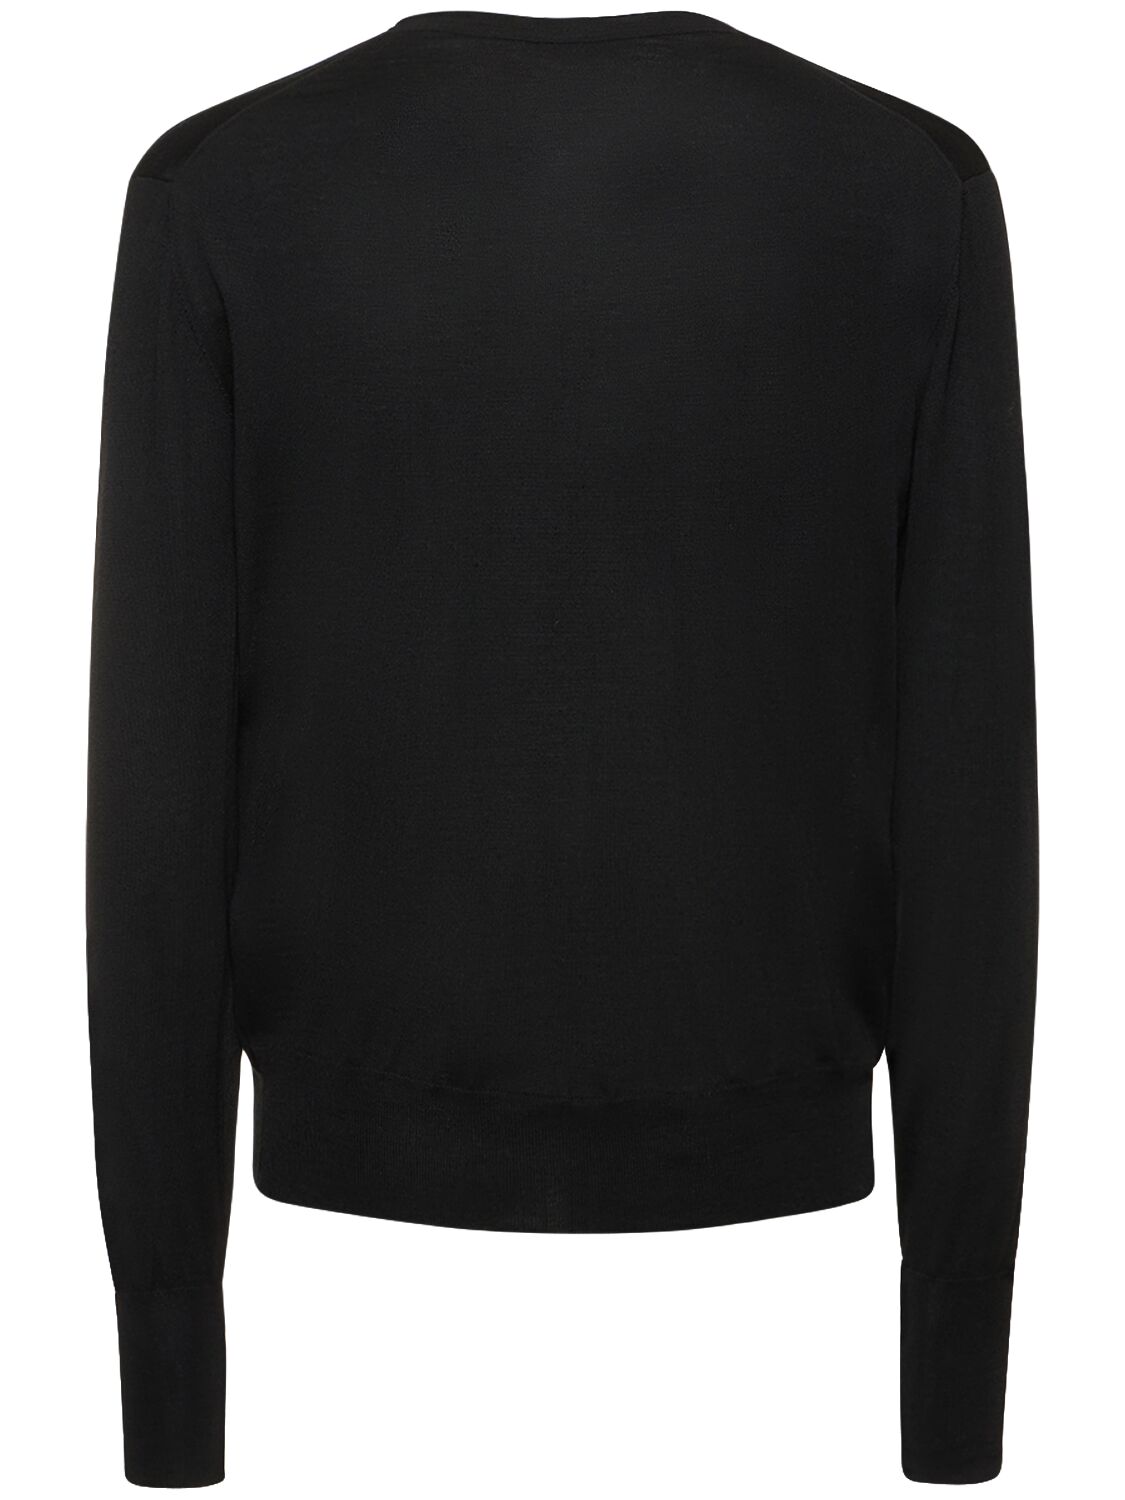 Image of Superfine Wool Knit V-neck Sweater